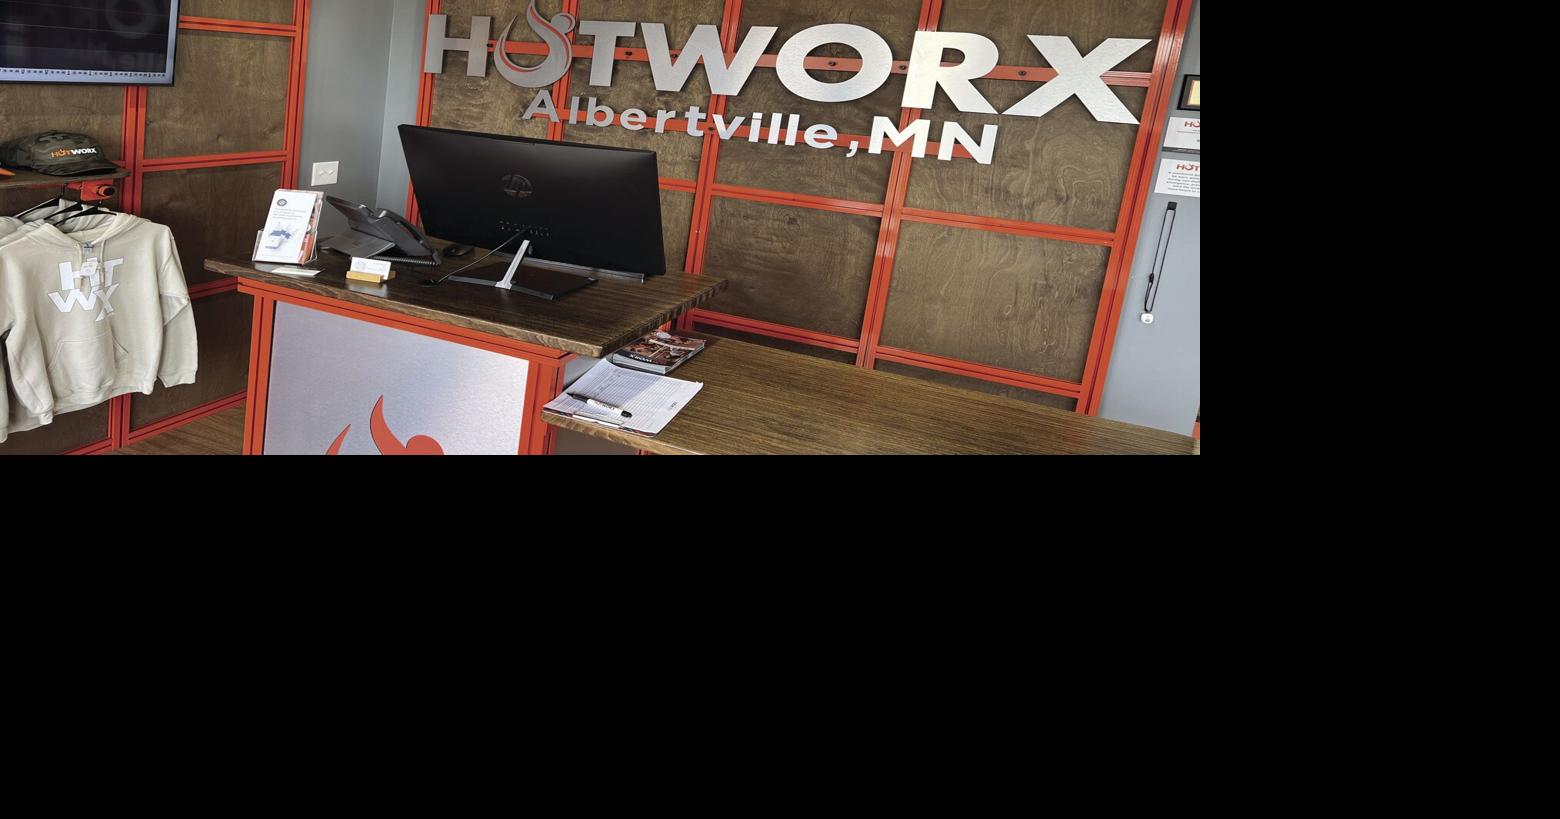 HOTWORX - Fitness Health Studios - Press Release - Franchise Central